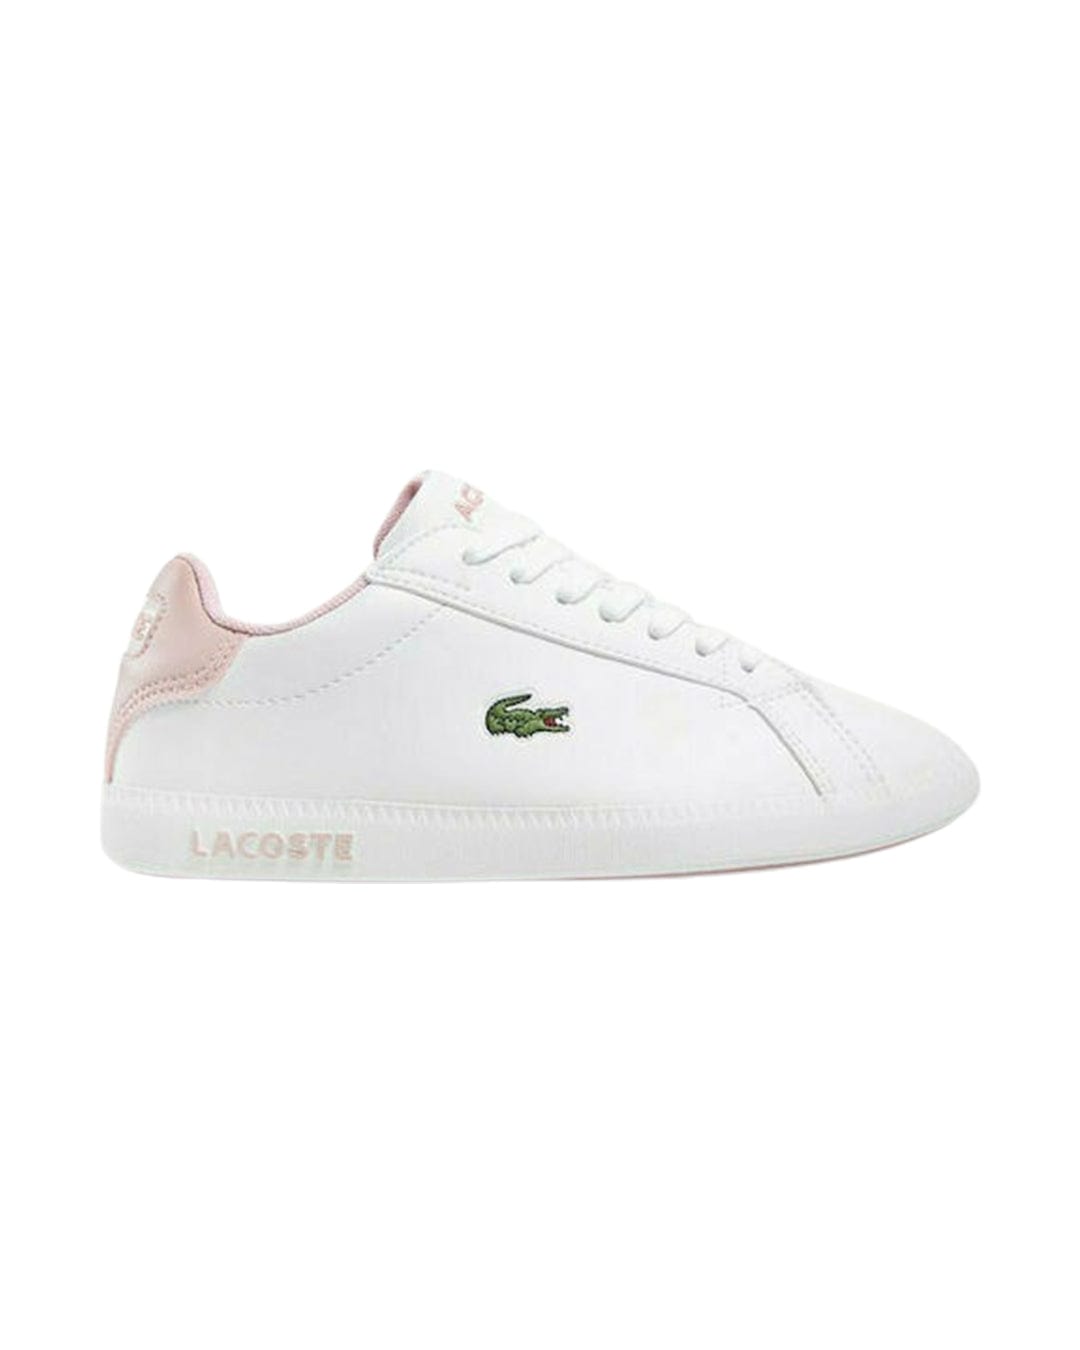 Lacoste Shoes Girls Lacoste Court Drive Textile Sneakers